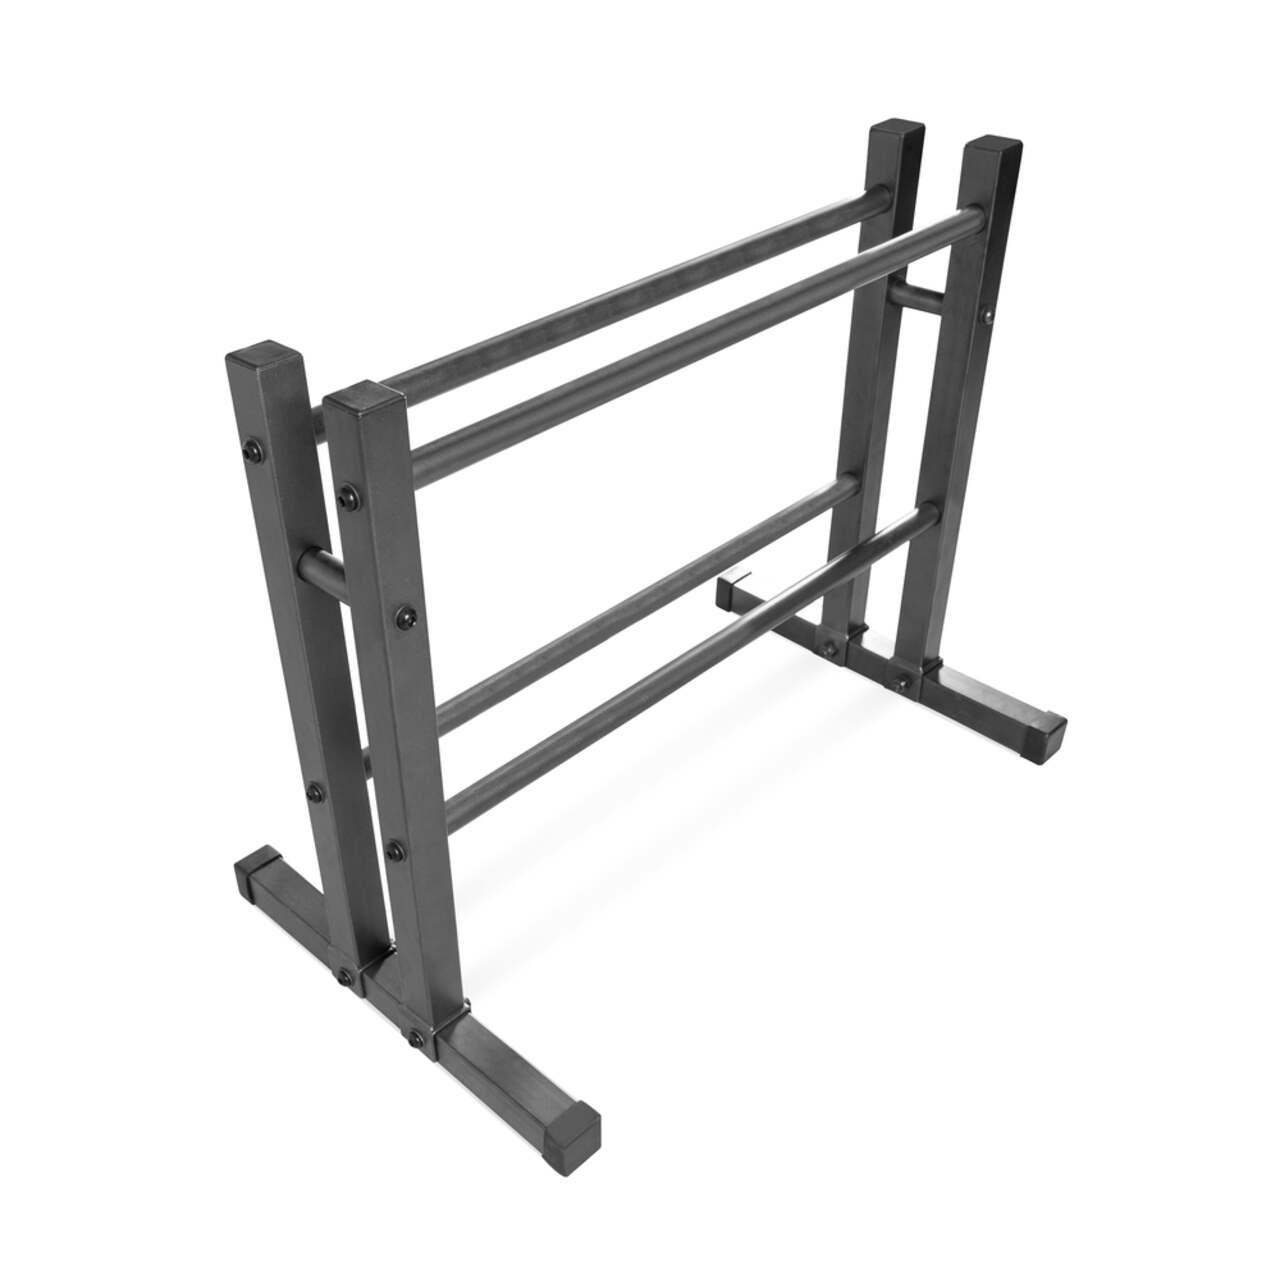 Cap Barbell 2-Level Utility/Exercise Storage Rack, 24-in